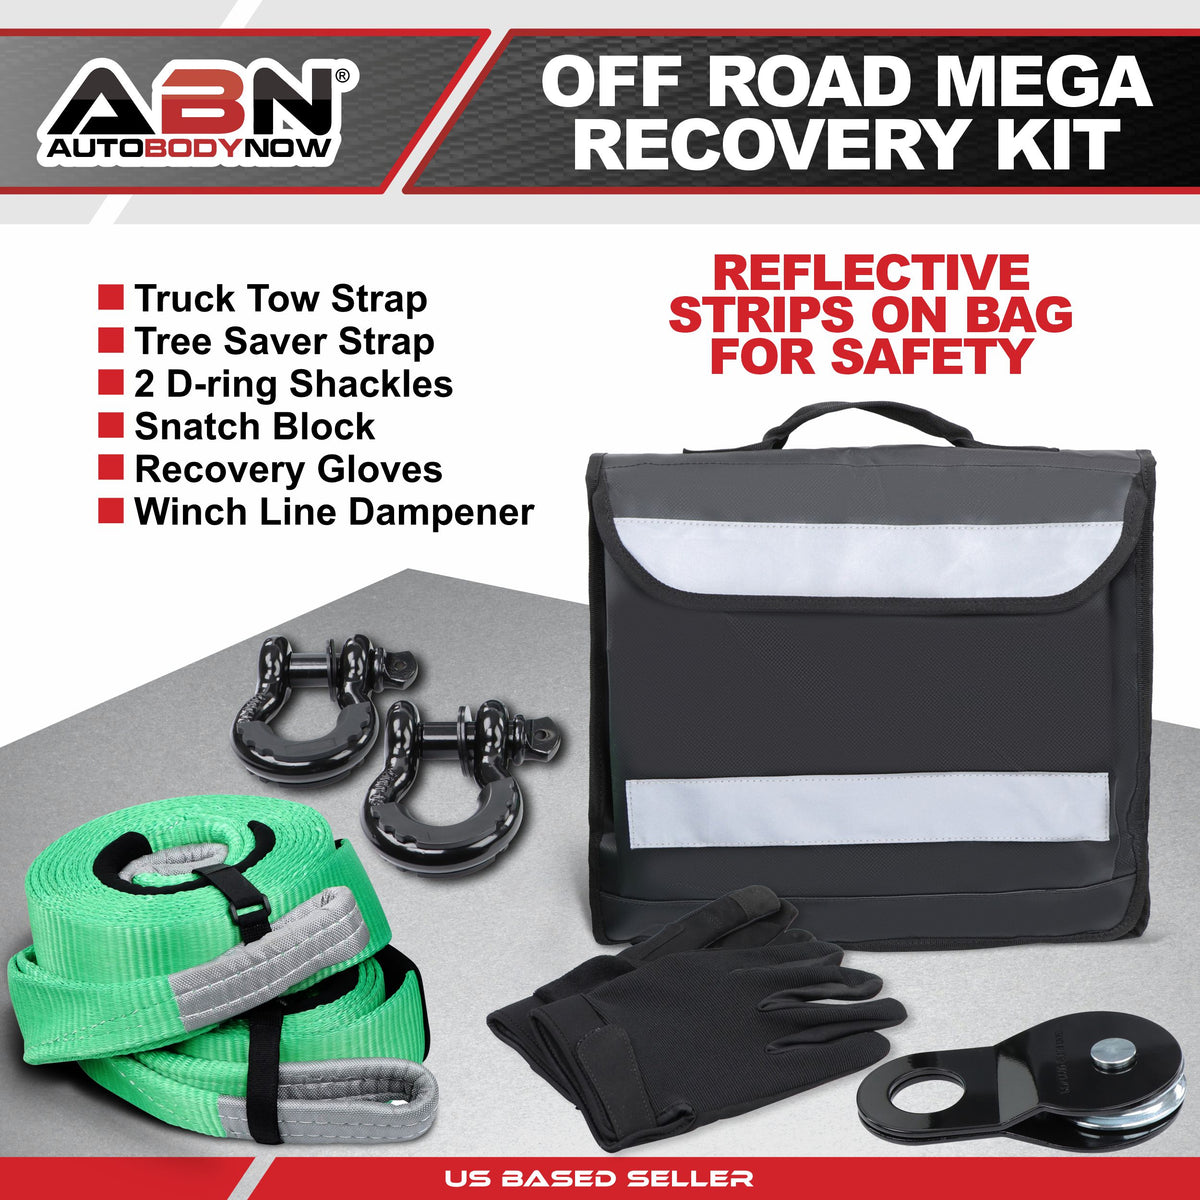 Tow Strap Kit - 35,000lbs Load Limit Truck Tow Straps And Snatch Block